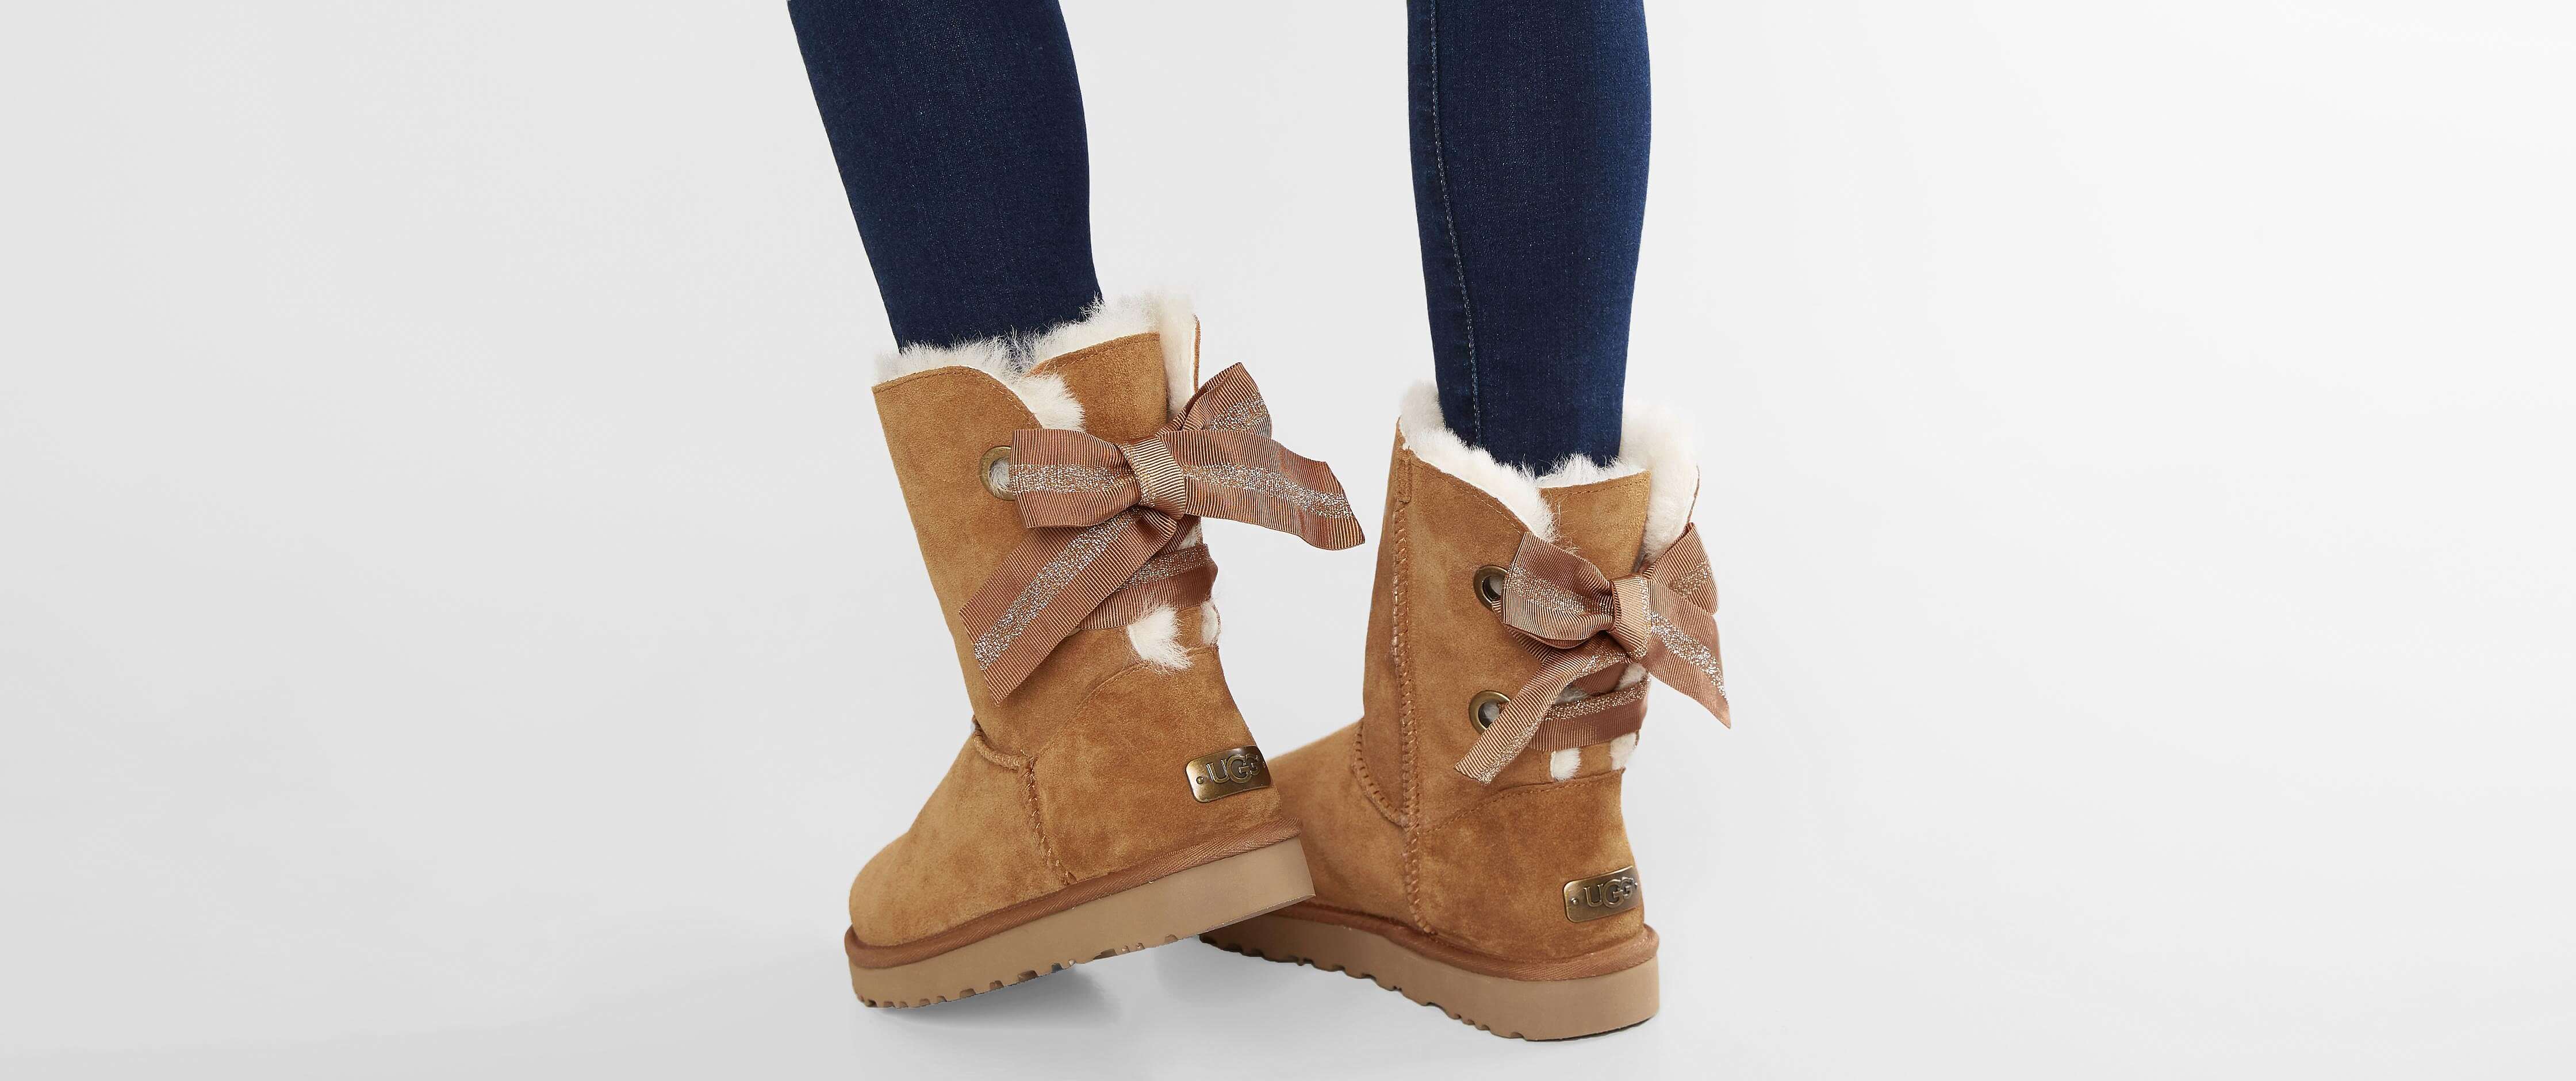 ugg boots with laces on the back